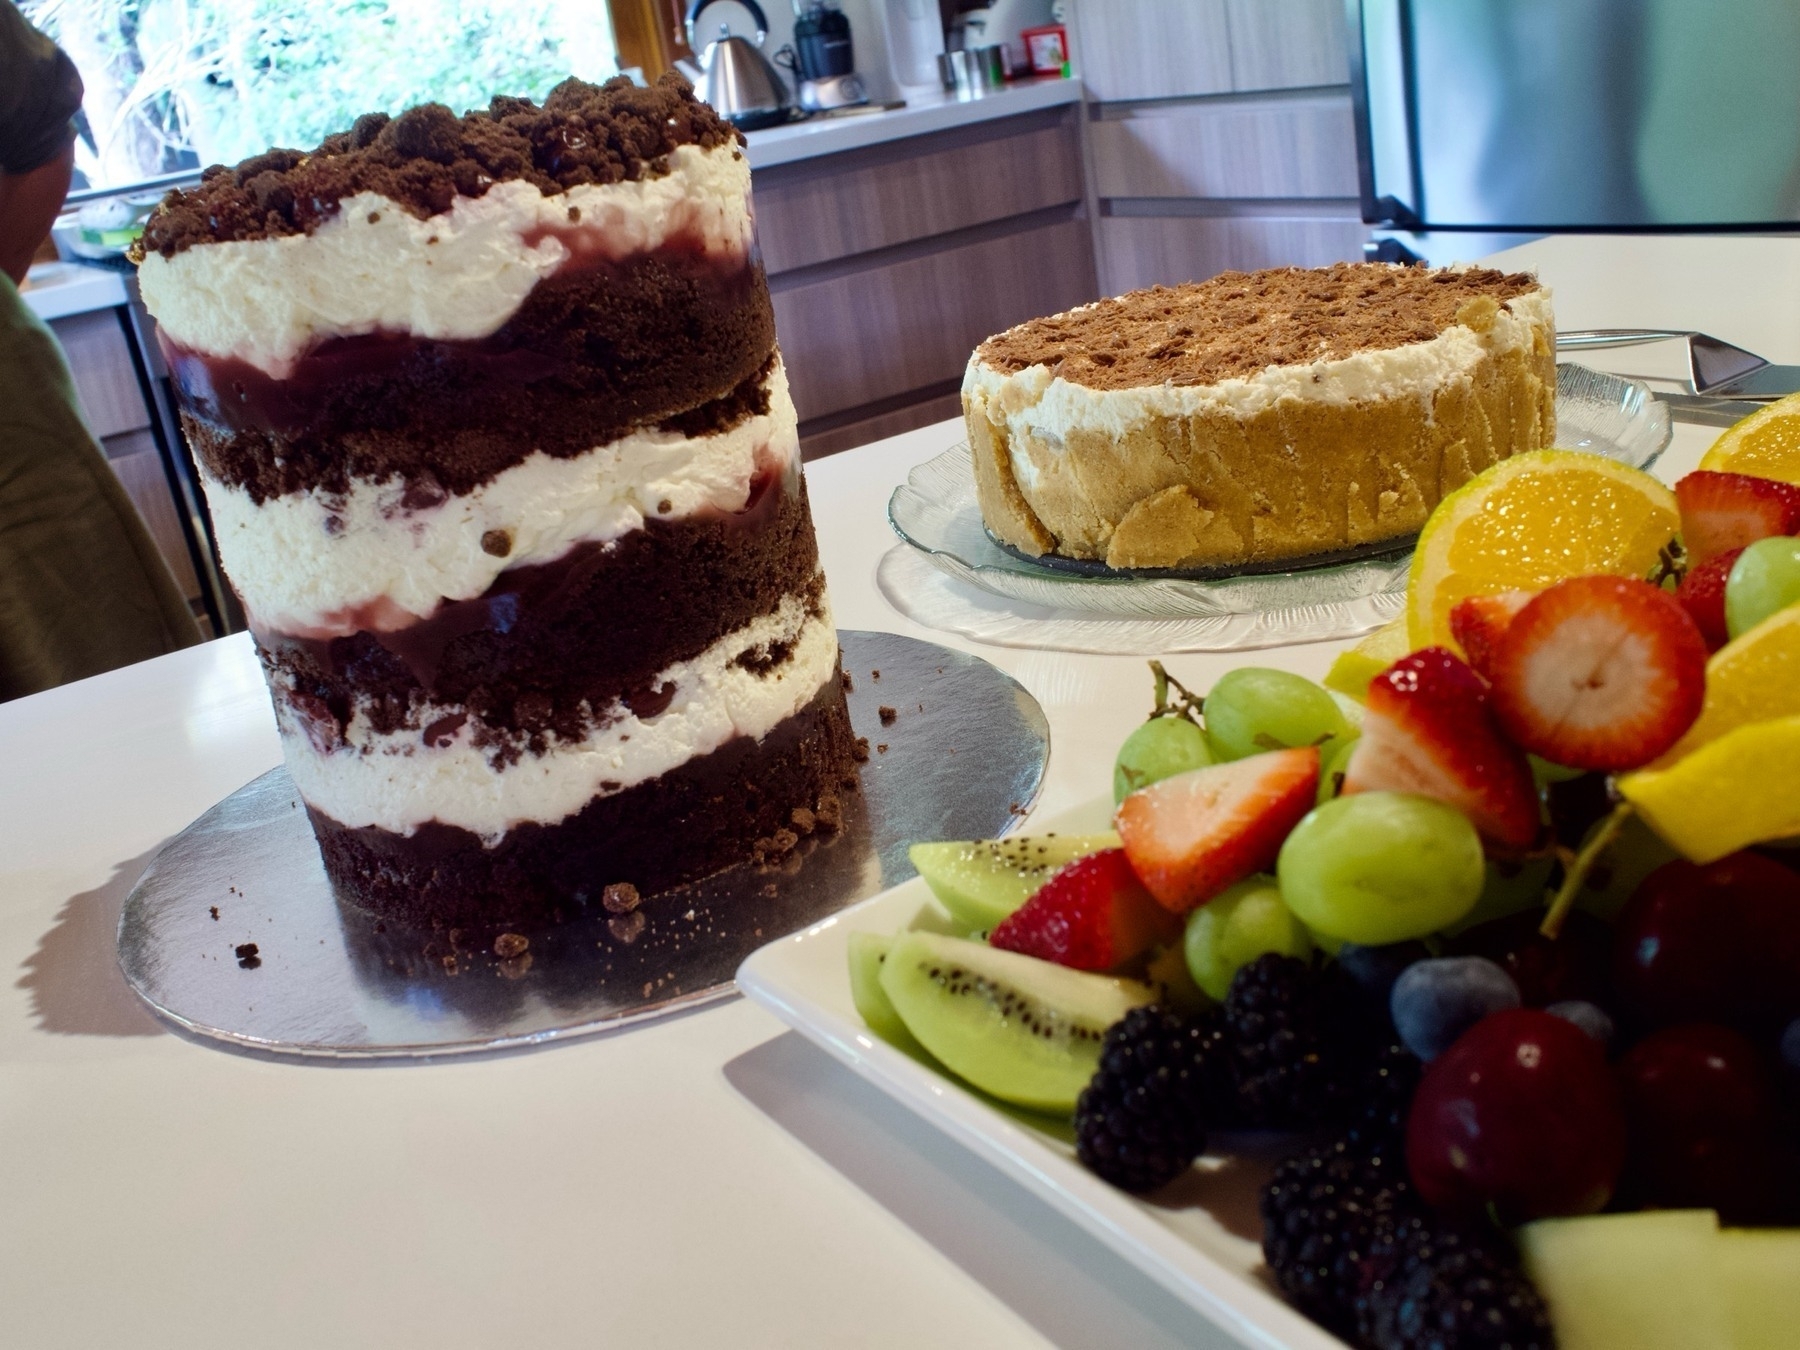 A tall chocolate cake, banoffee pie and fruit platter